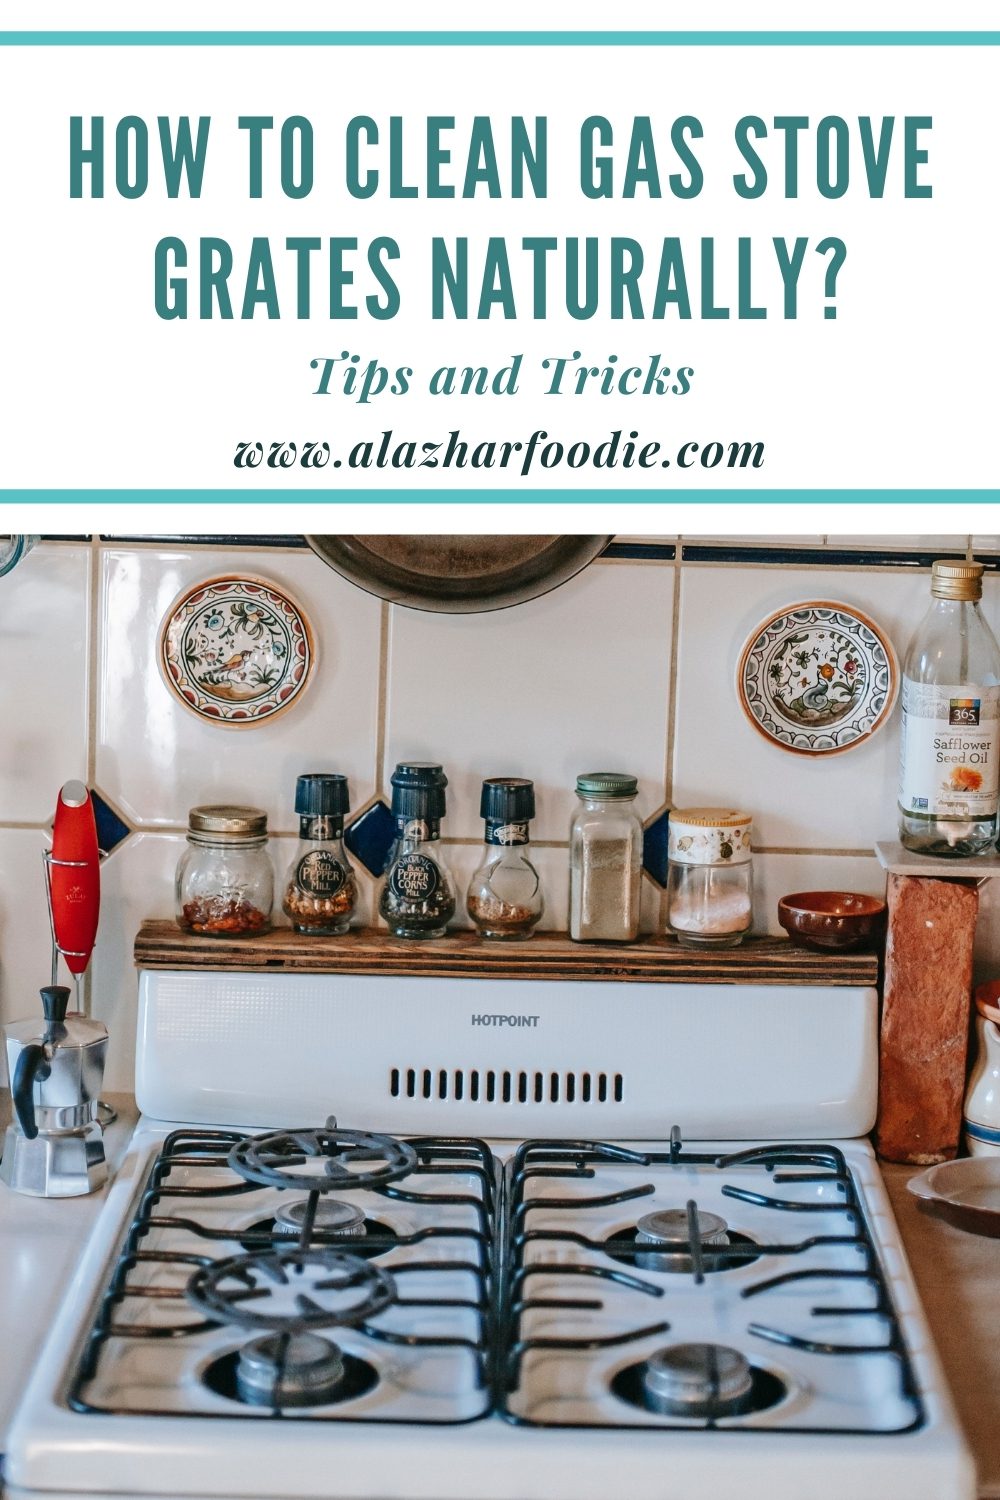 How To Clean Gas Stove Grates Naturally? » Al Azhar Foodie